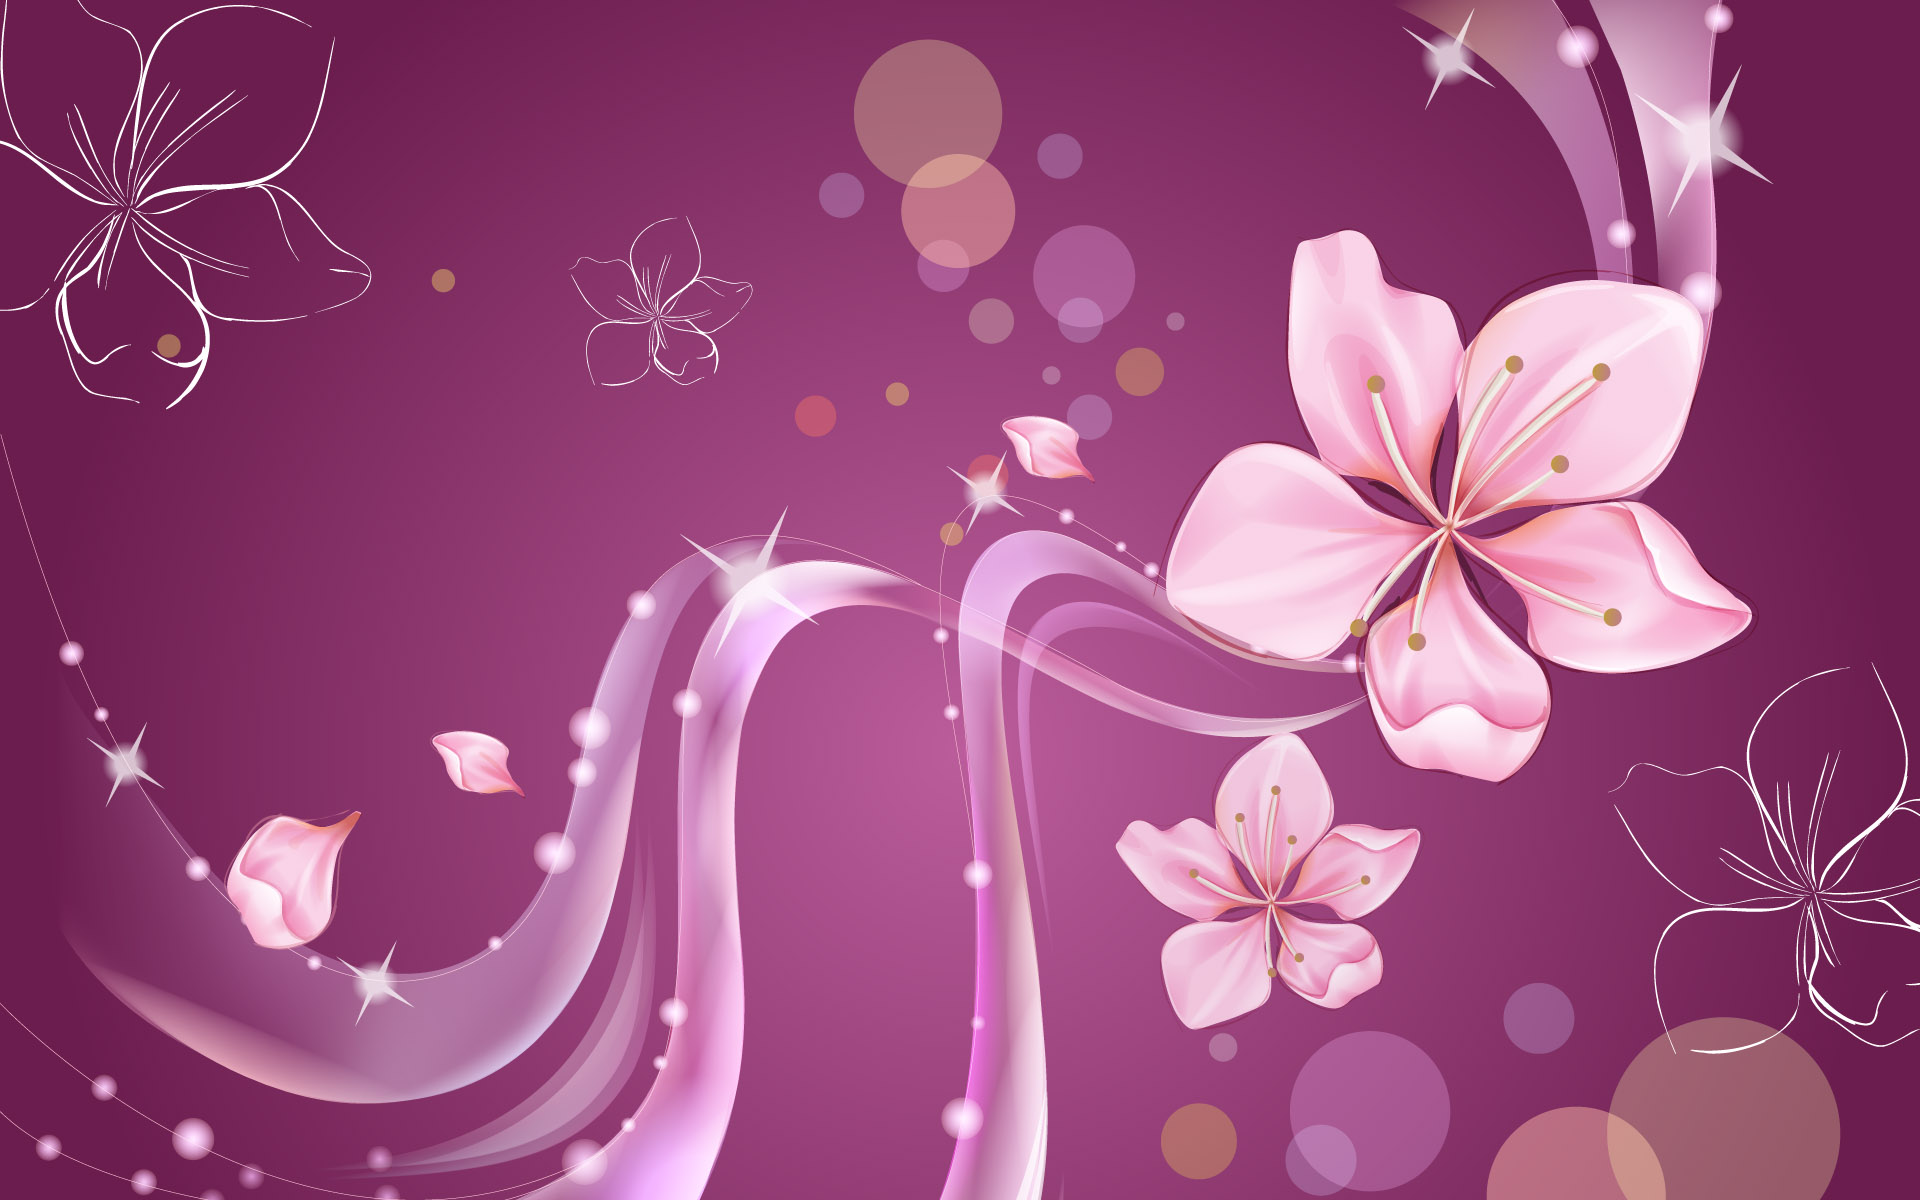 Abstract Flowers Design Wallpaper X Photo Of